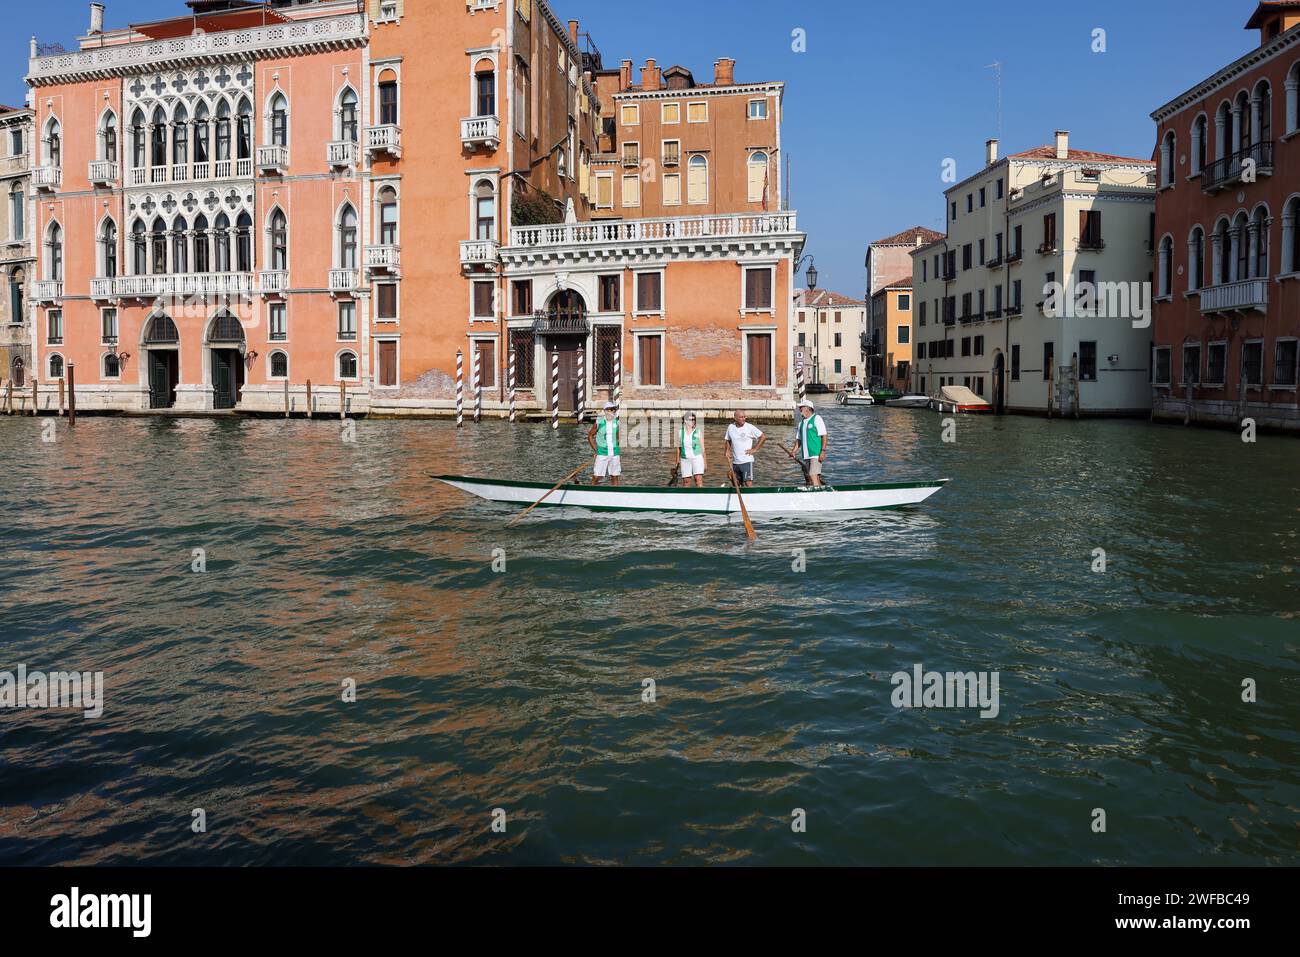 Venice, Italy - September 6, 2022: Local rowing team training on the Grand Canal in Venice, Italy Stock Photo